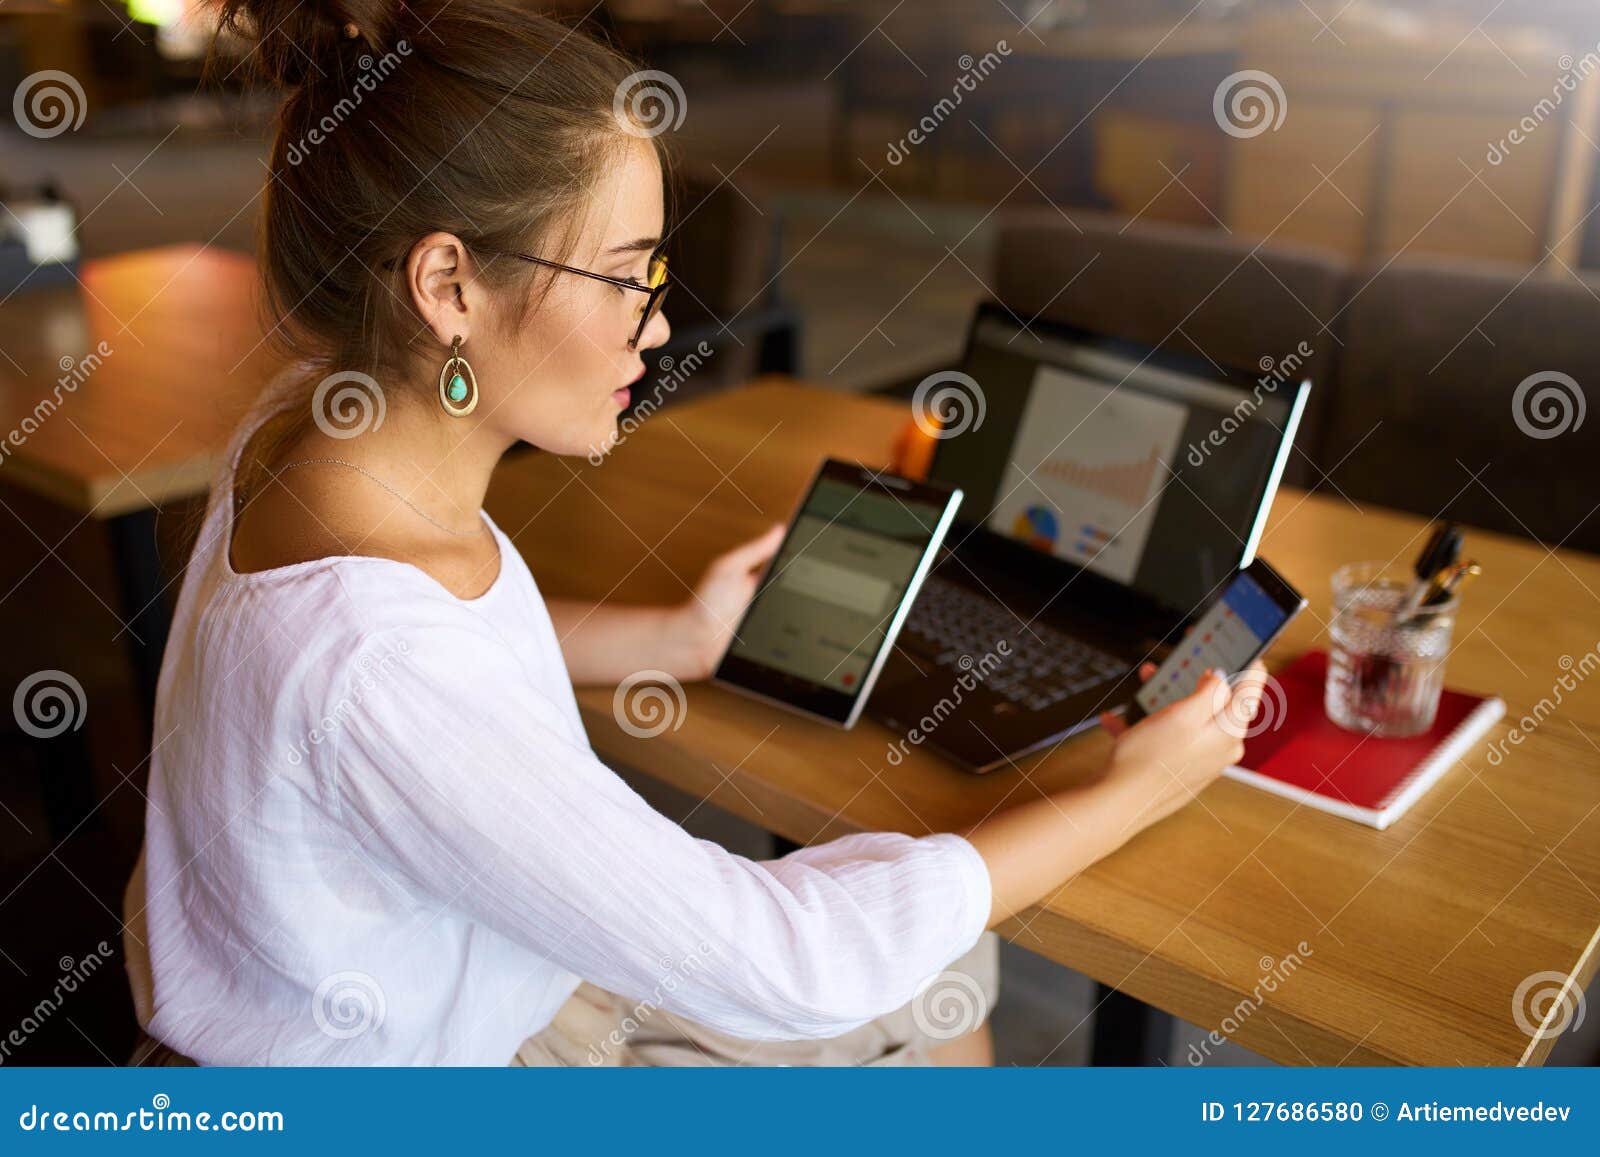 mixed race woman in glasses working with multiple electronic internet devices. freelancer businesswoman has tablet and